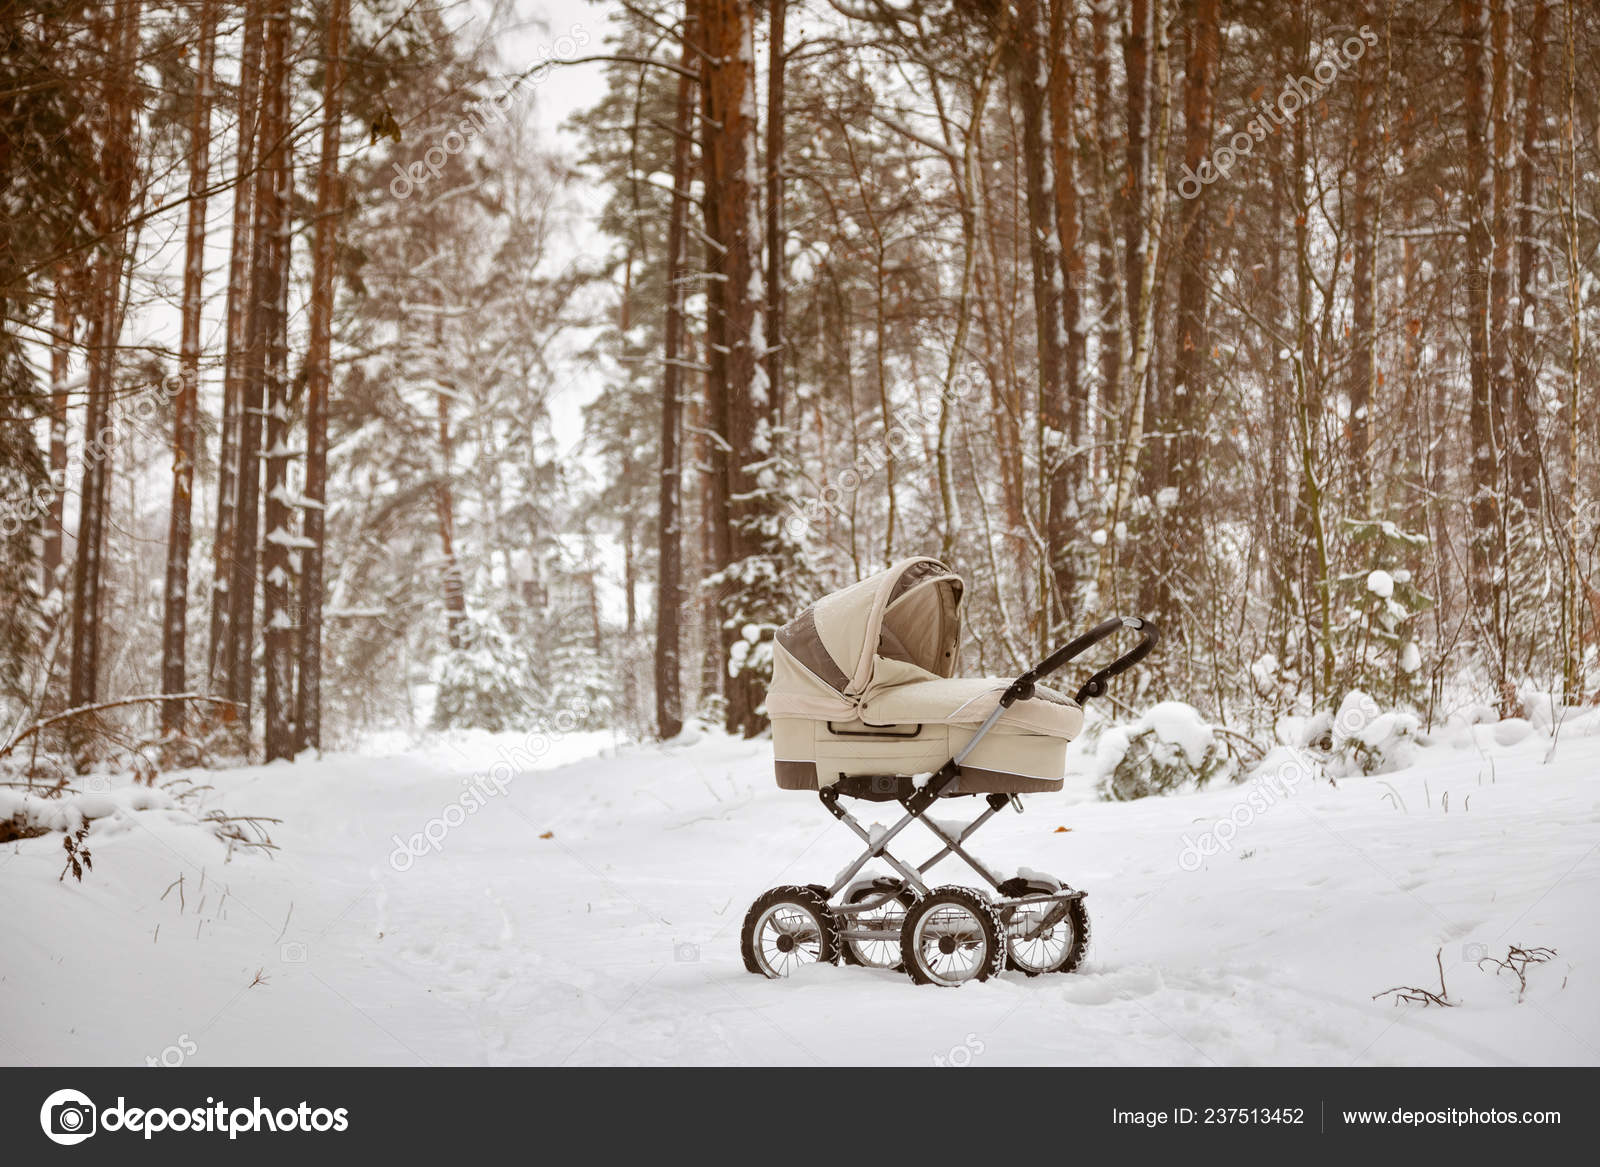 stroller in the snow